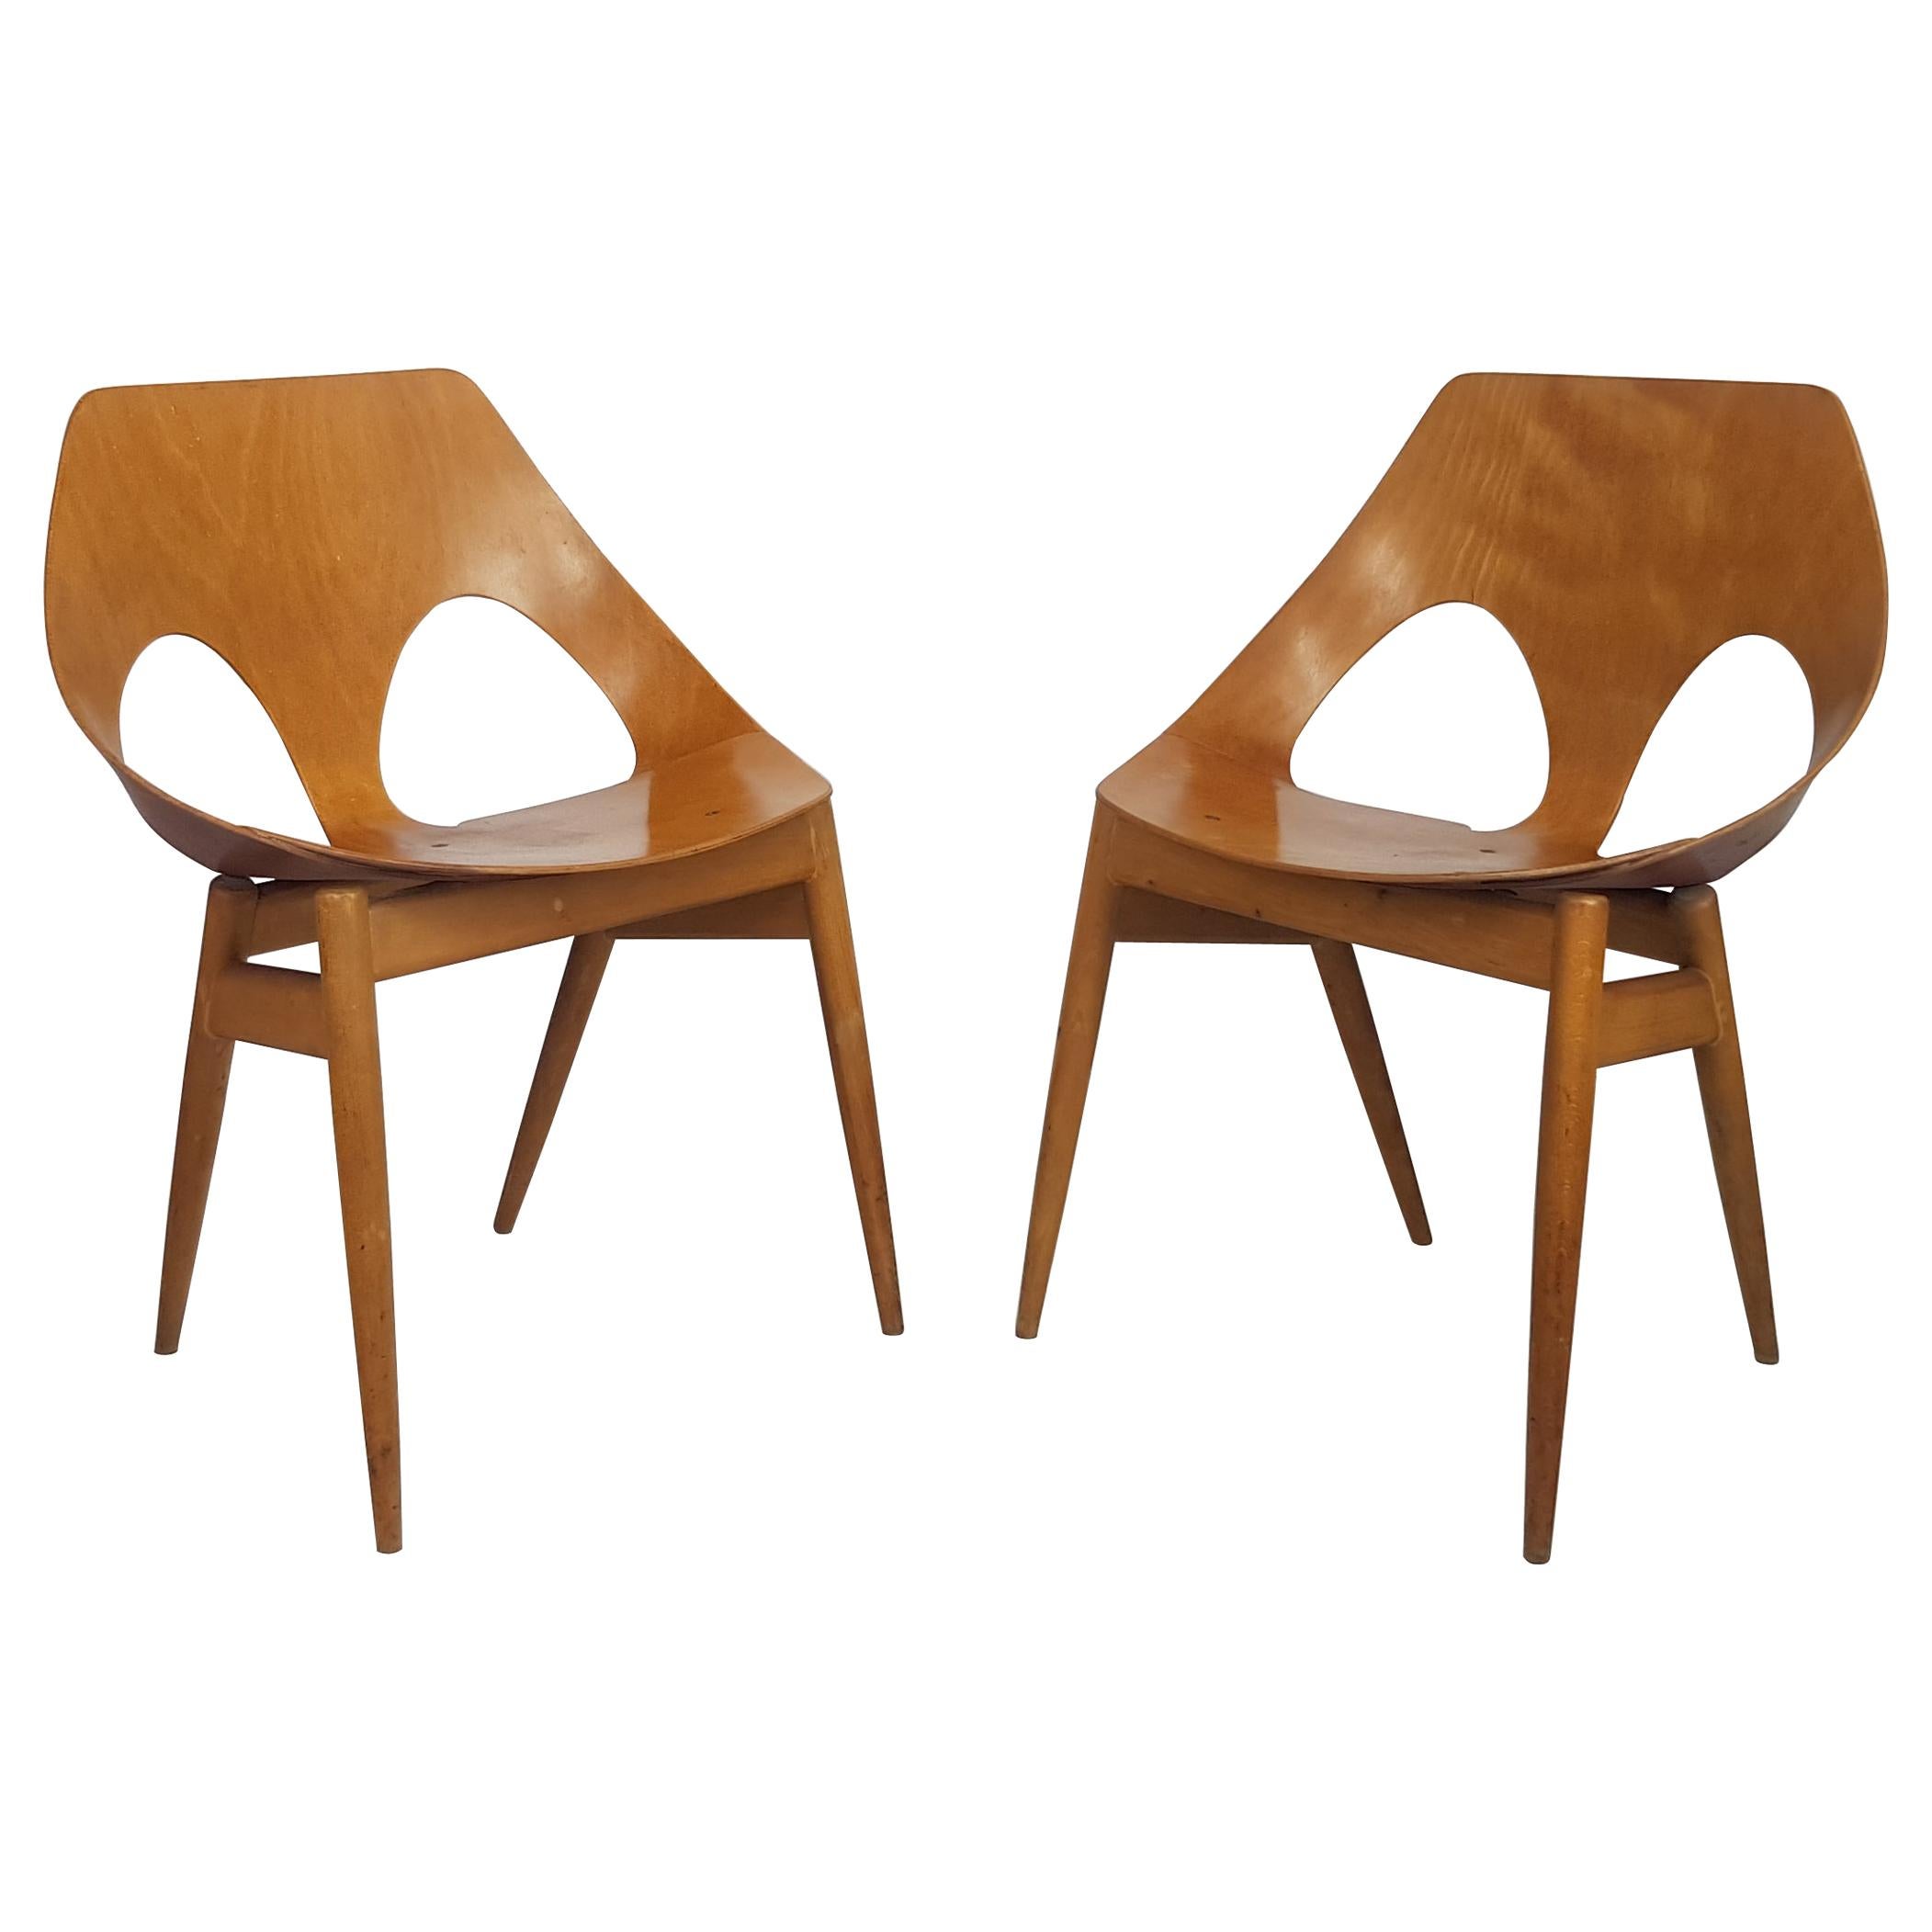 Pair of 1950s Jason Chairs Designed by Carl Jacobs & Frank Guille for Kandya For Sale